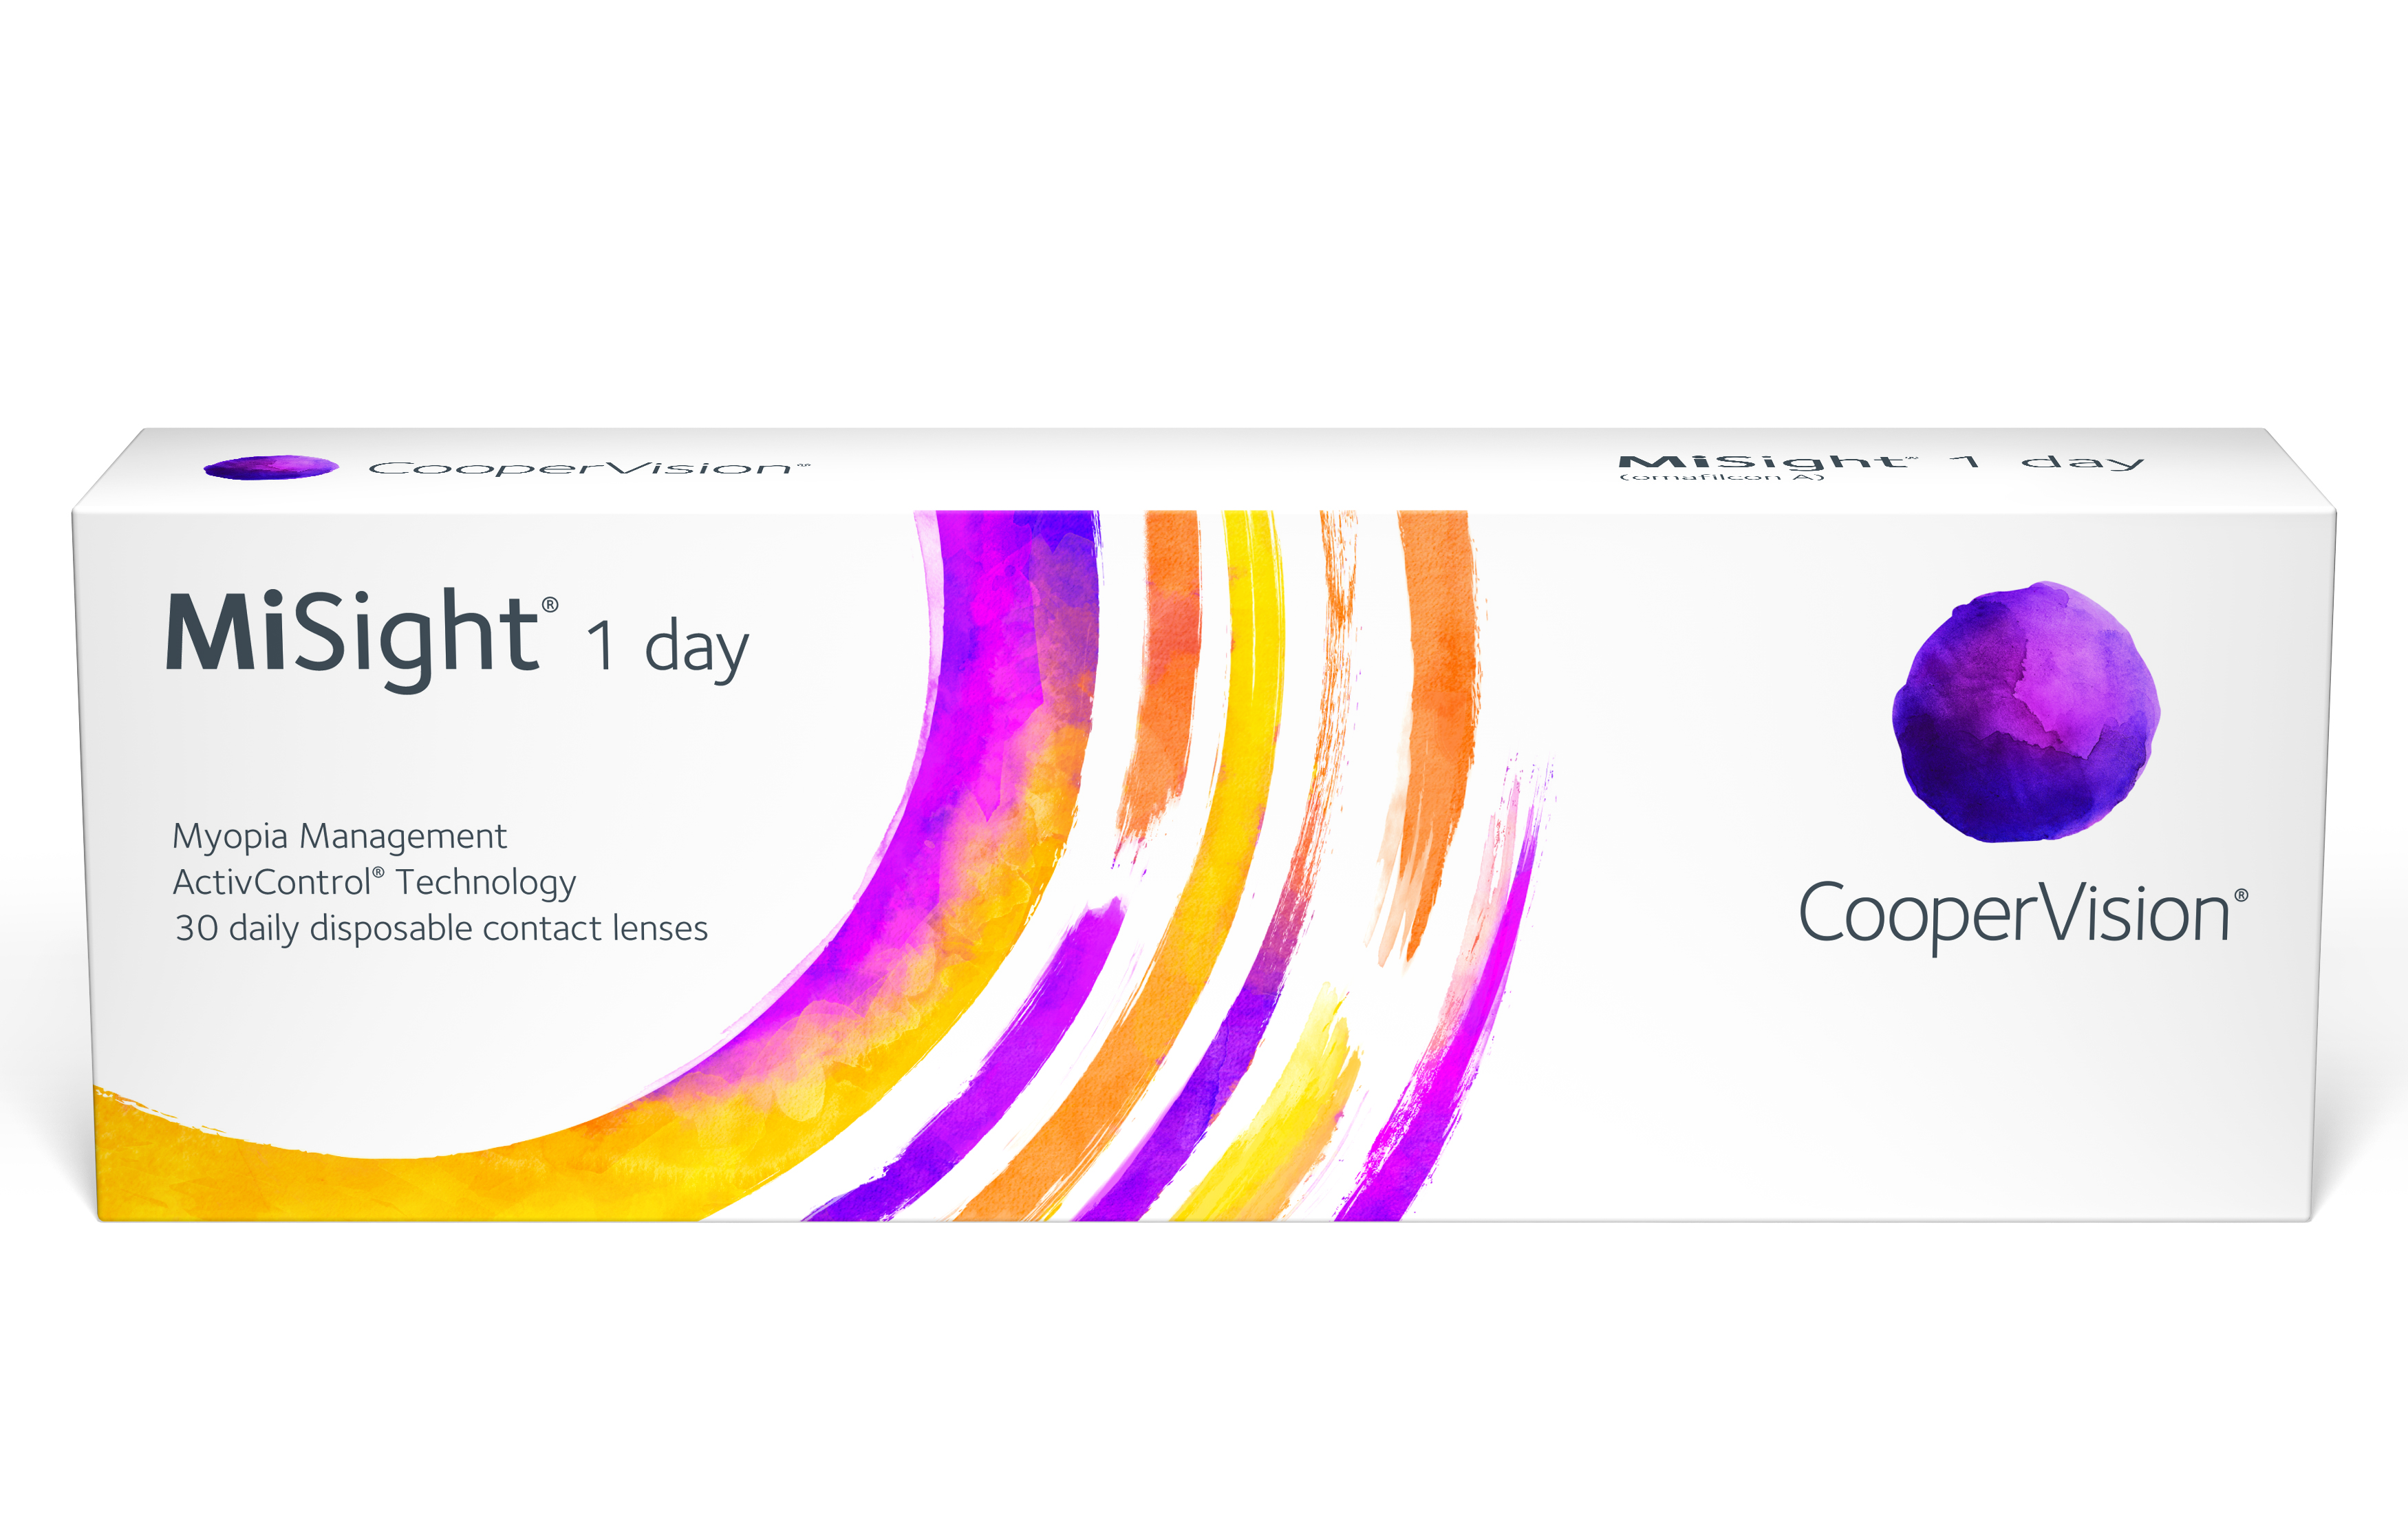 coopervision-launches-misight-1-day-contact-lens-for-children-in